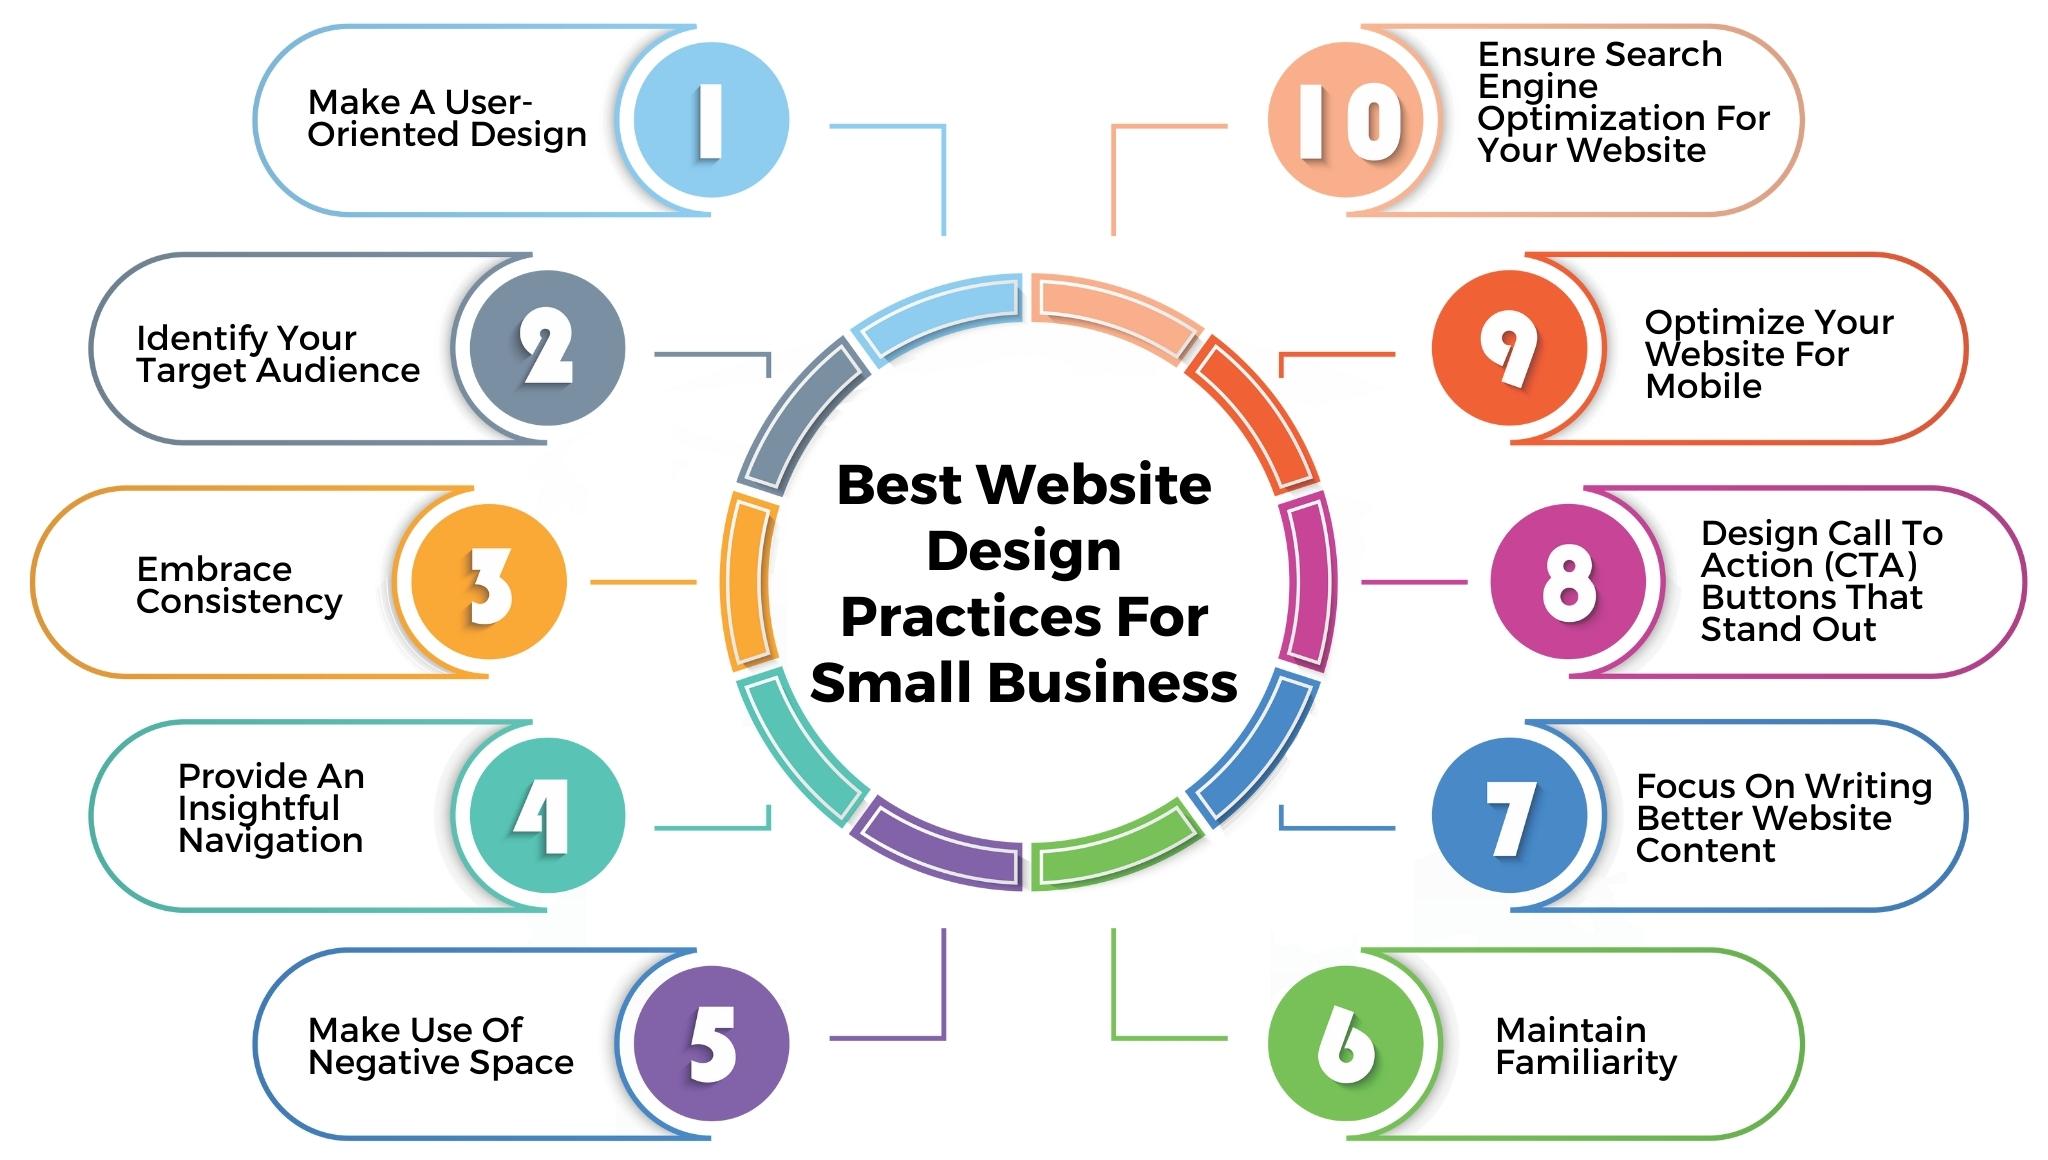 Best Website Design Practices For Small Business